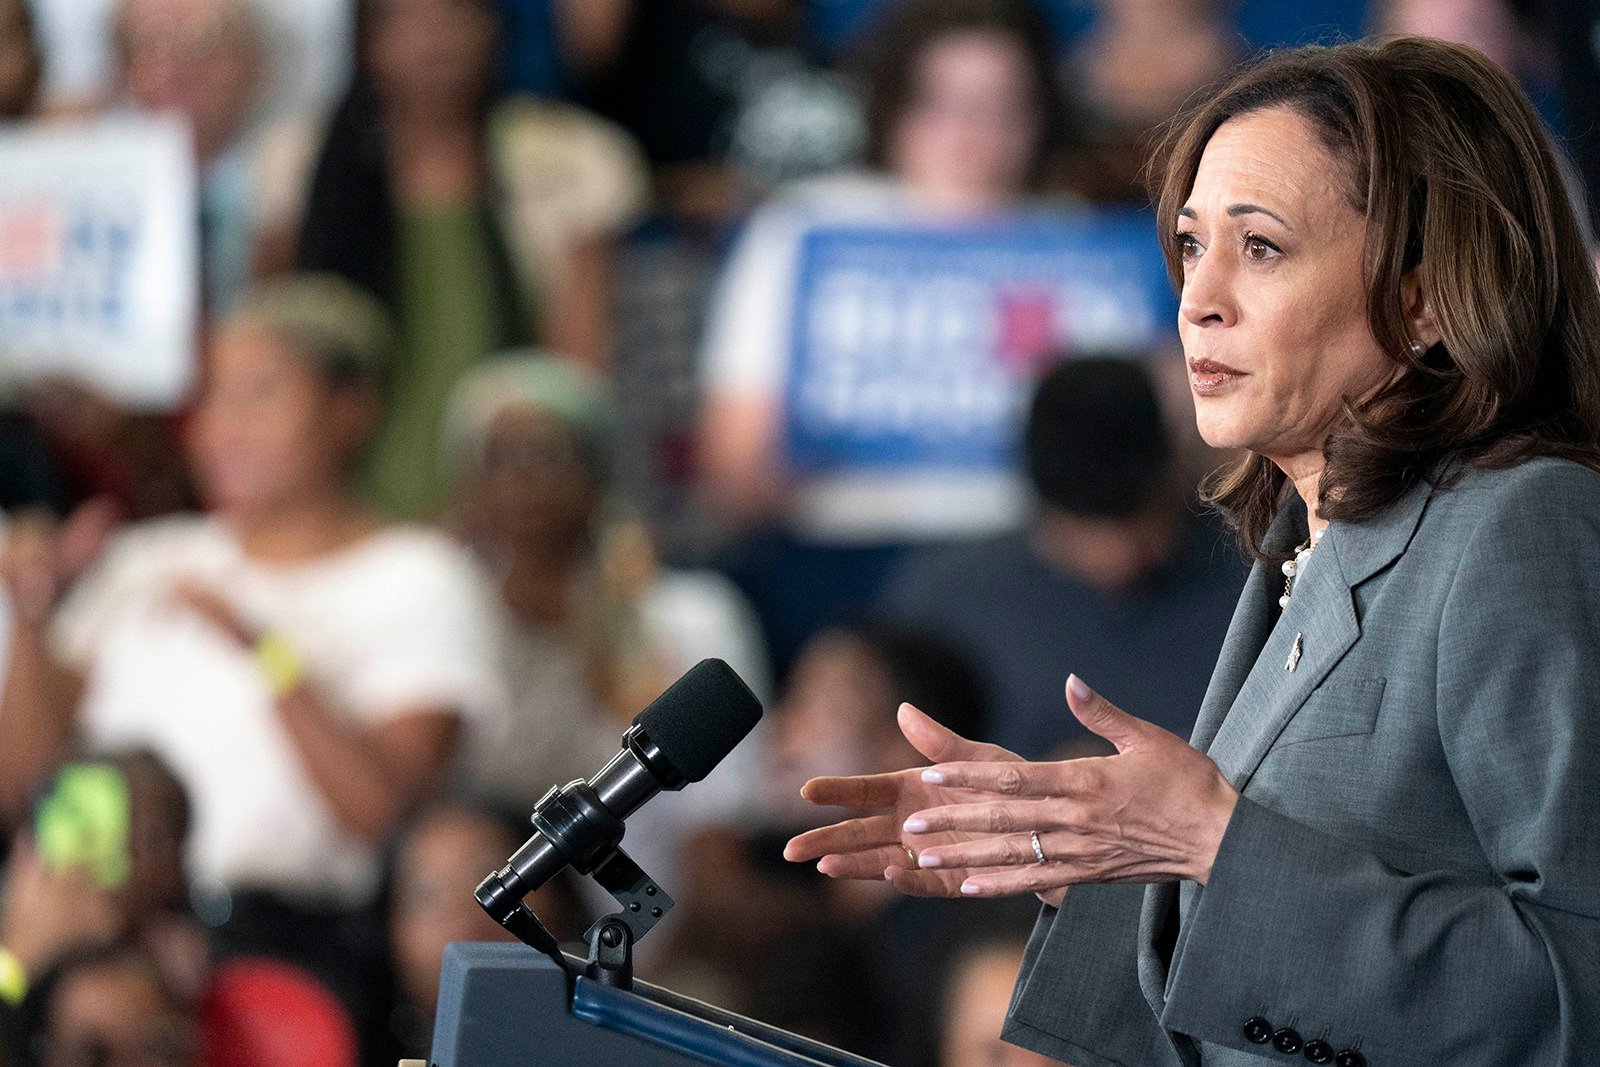 US Vice-President Kamala Harris speaks at a campaign event in Greensboro, North Carolina, on Thursday. Photo: Getty Images/TNS